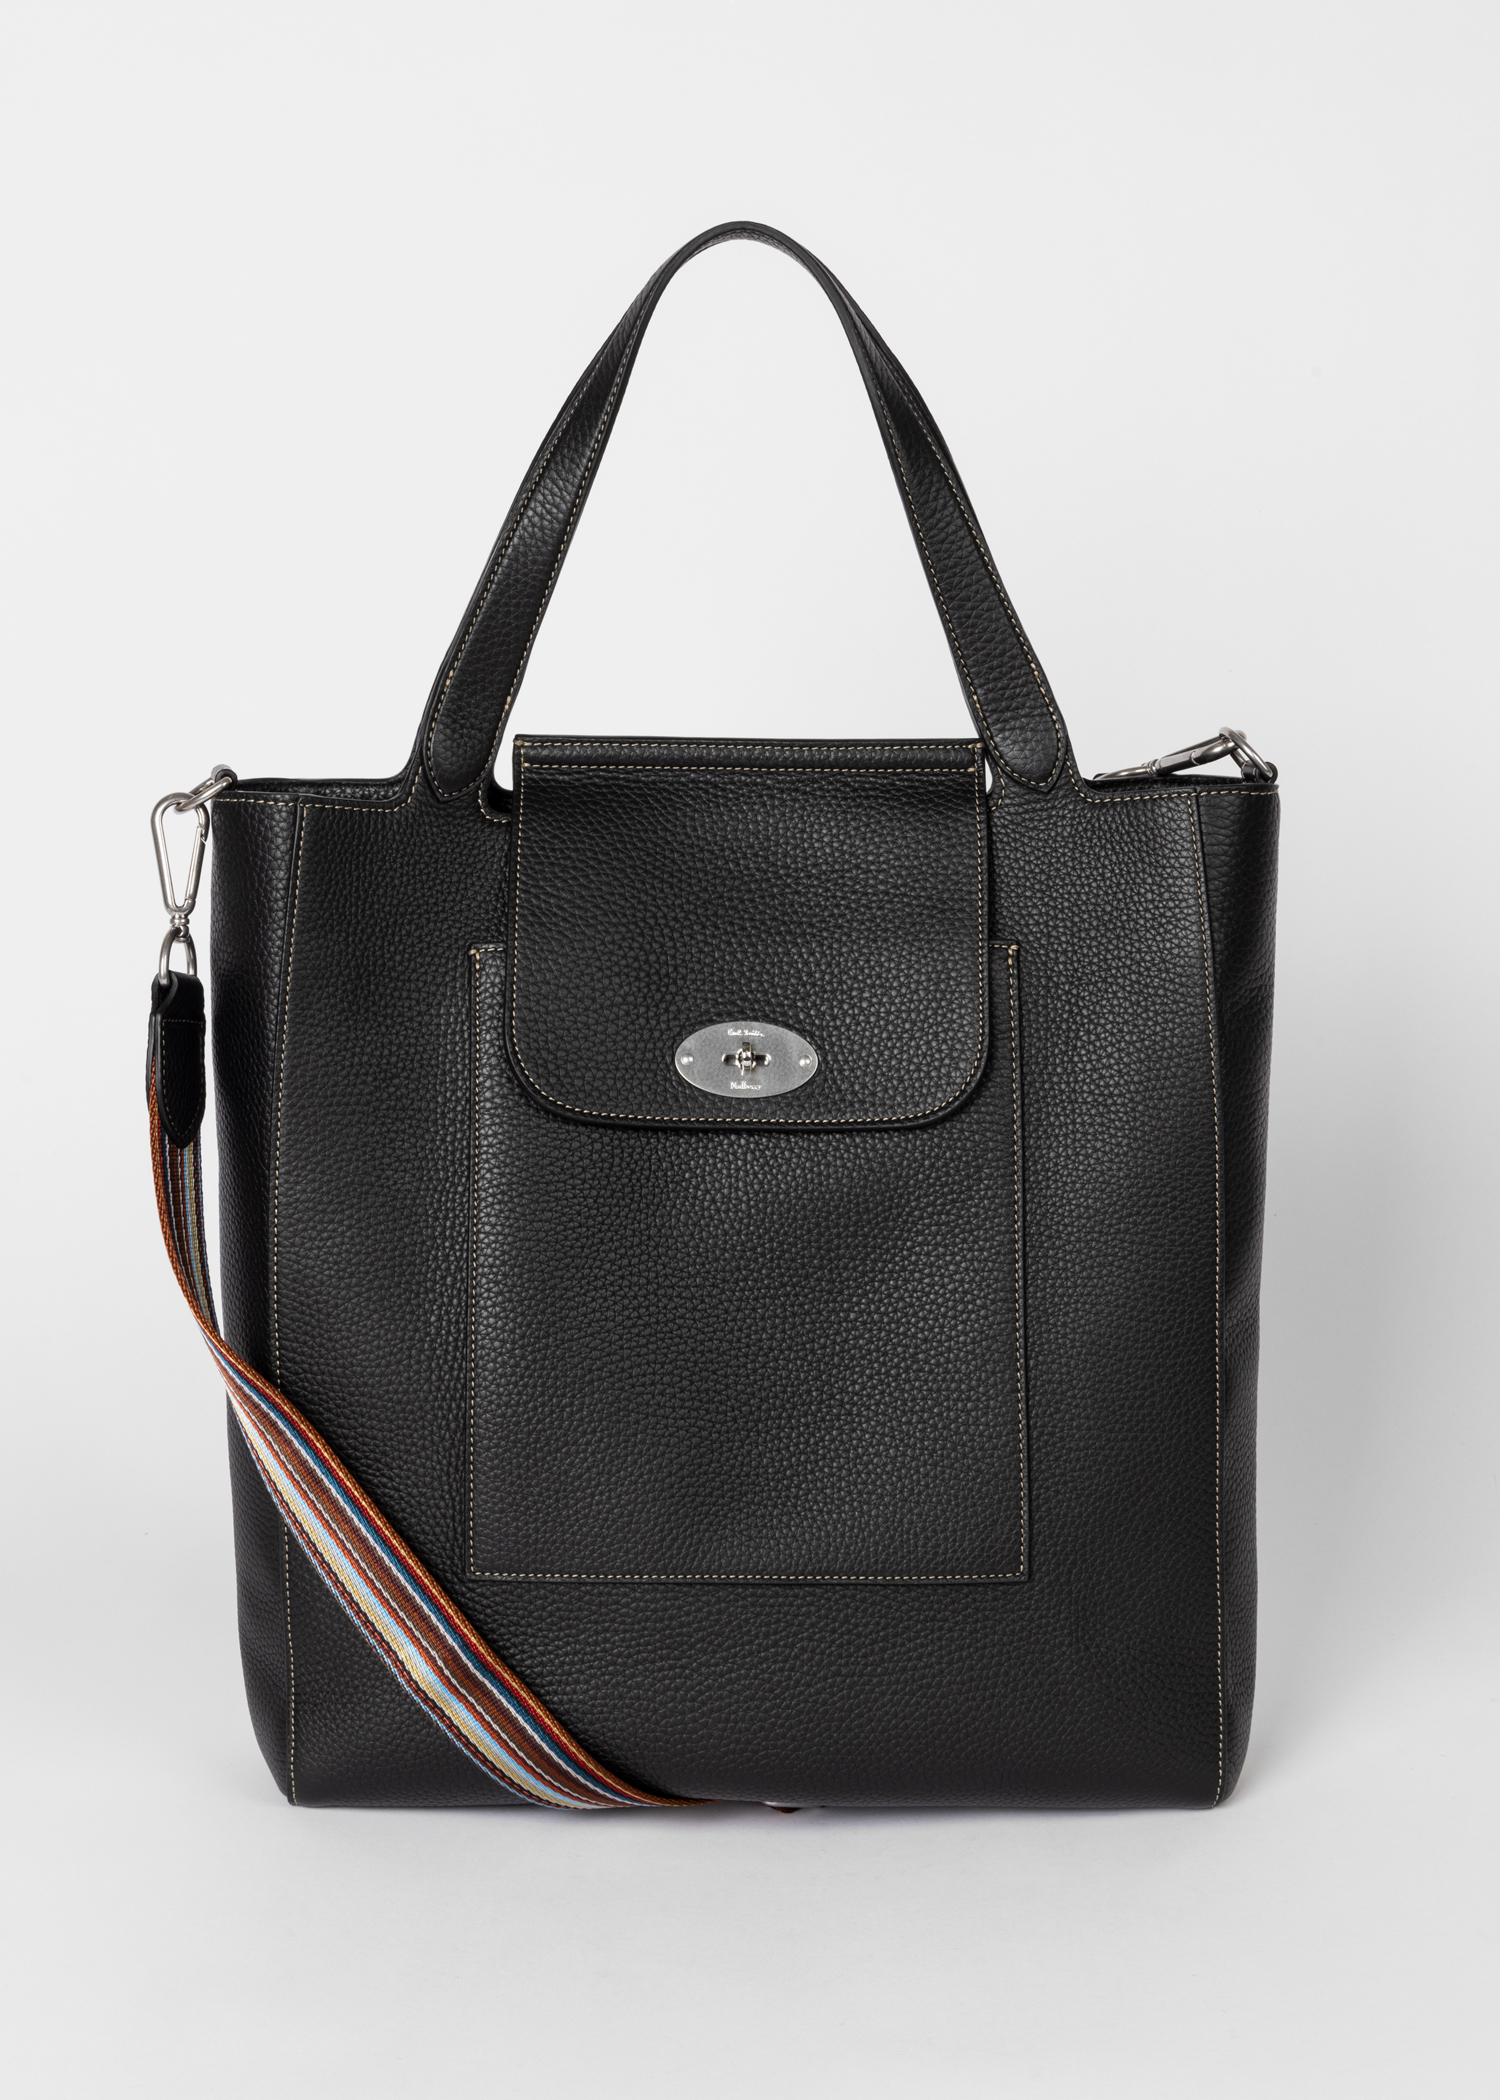 Designer Collaboration | Mulberry x Paul Smith